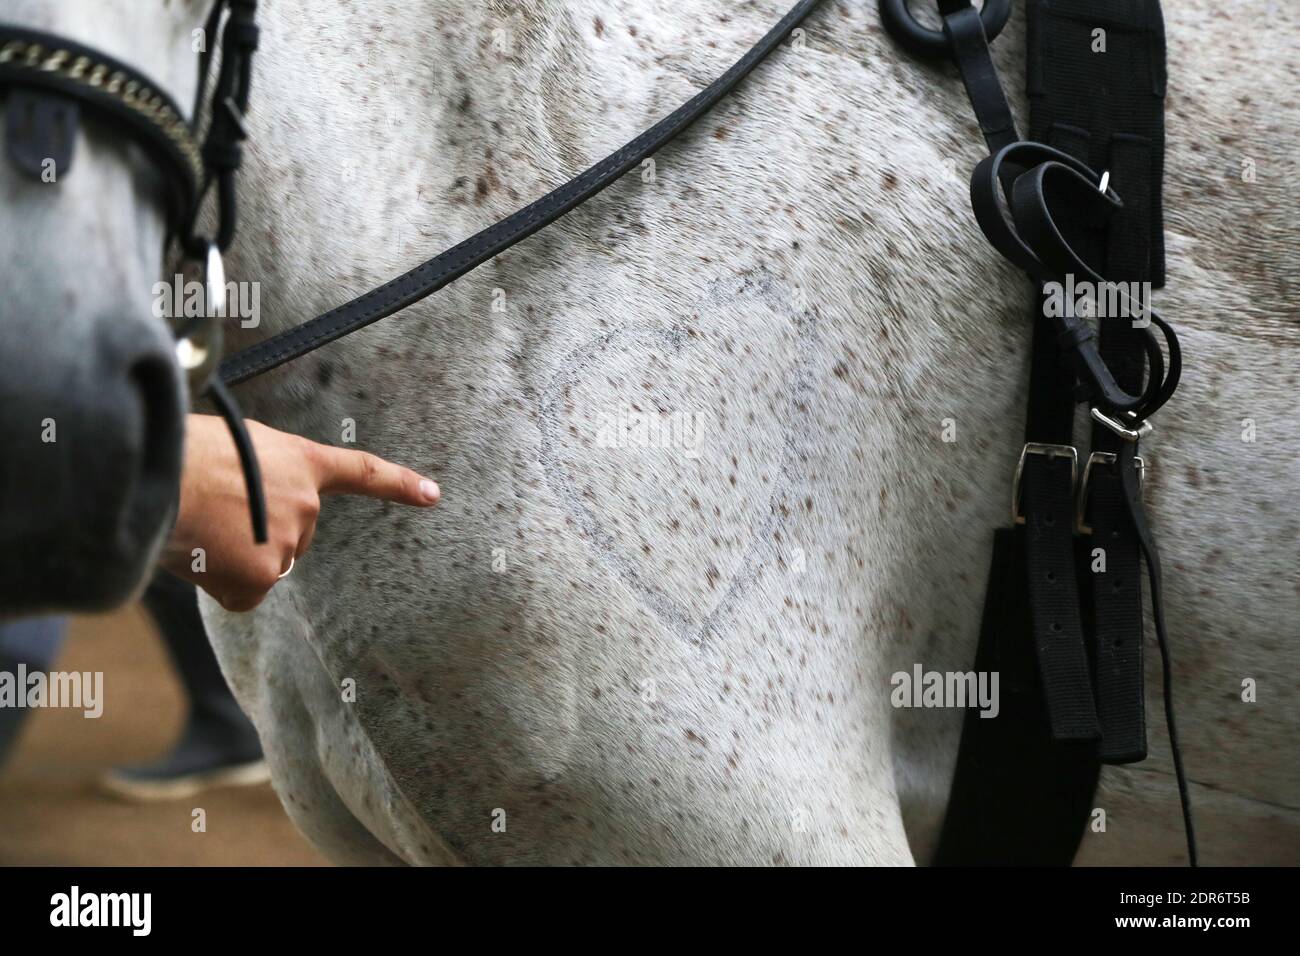 hand indicates a shaved heart-shaped symbol on a horse shoulder Stock Photo